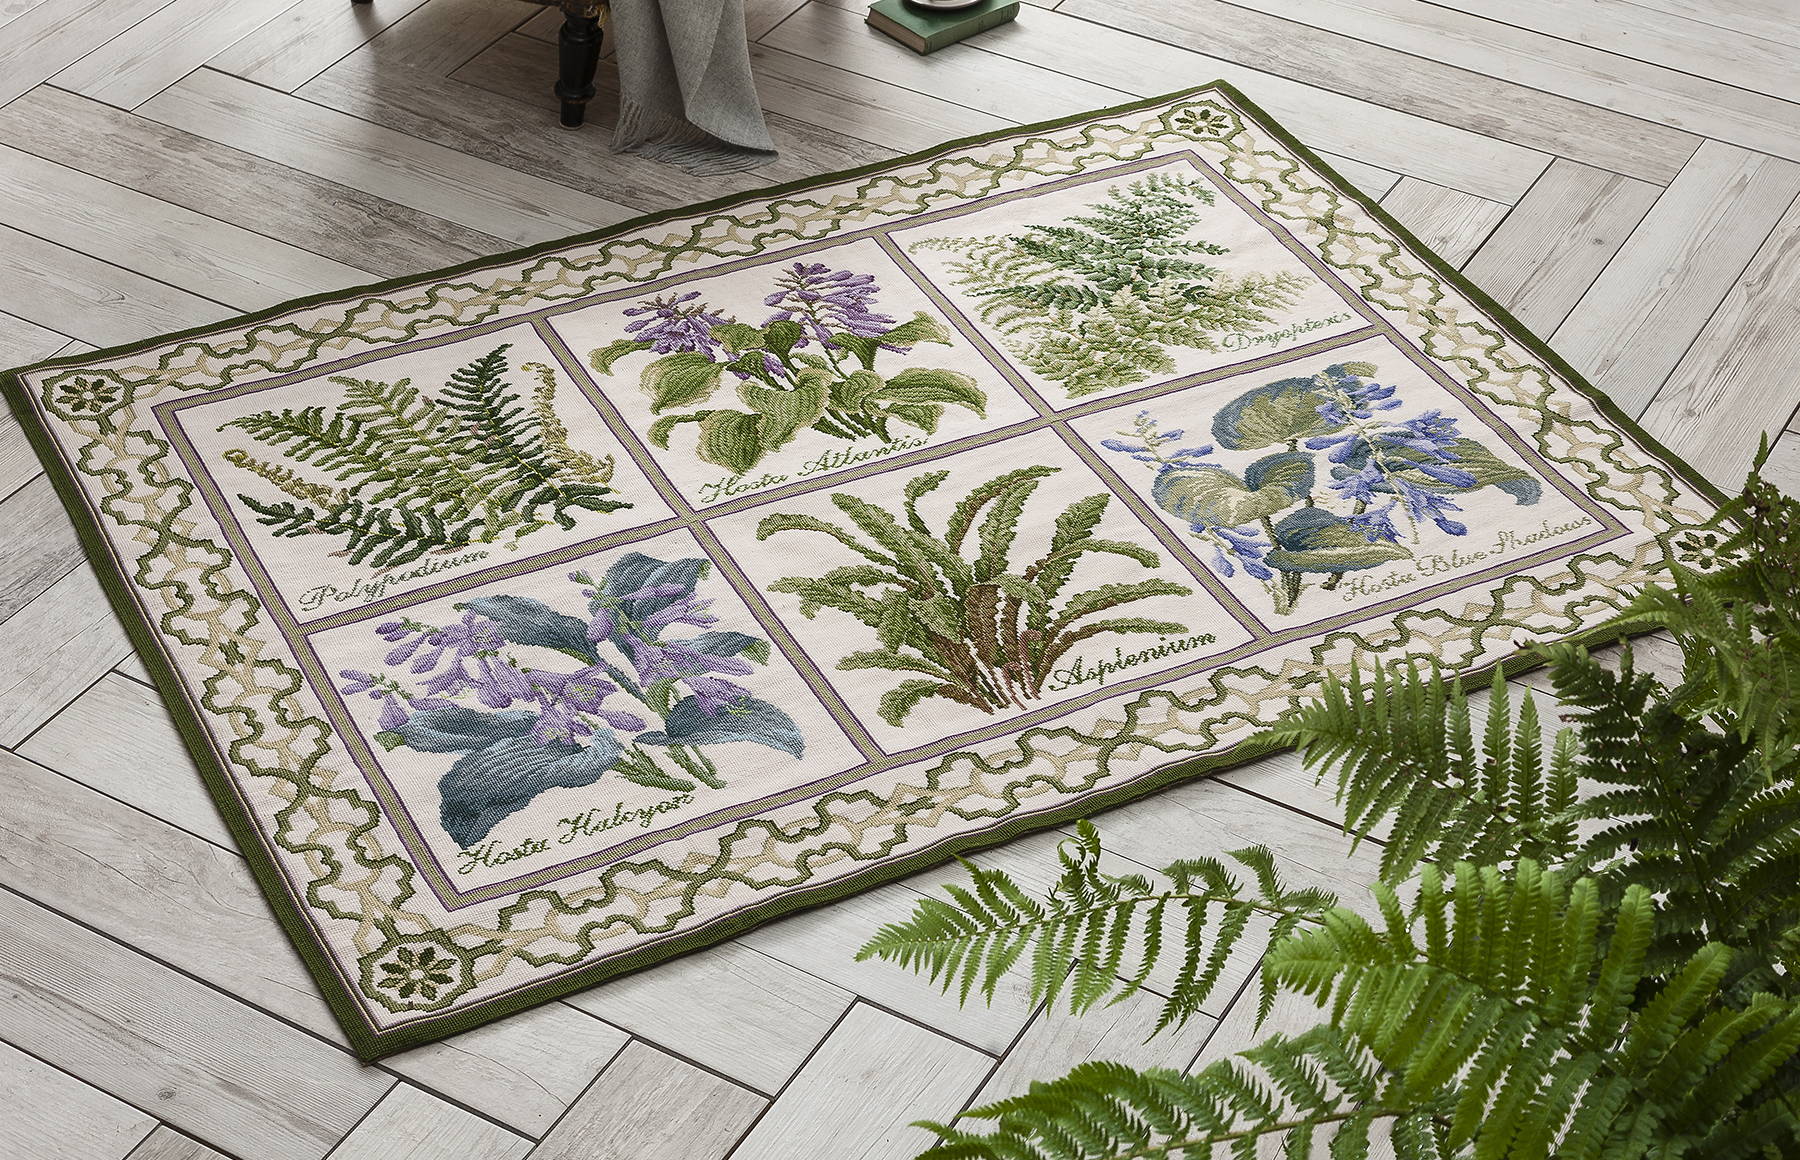 The Shade Garden Collection finished as a 6 panel rug